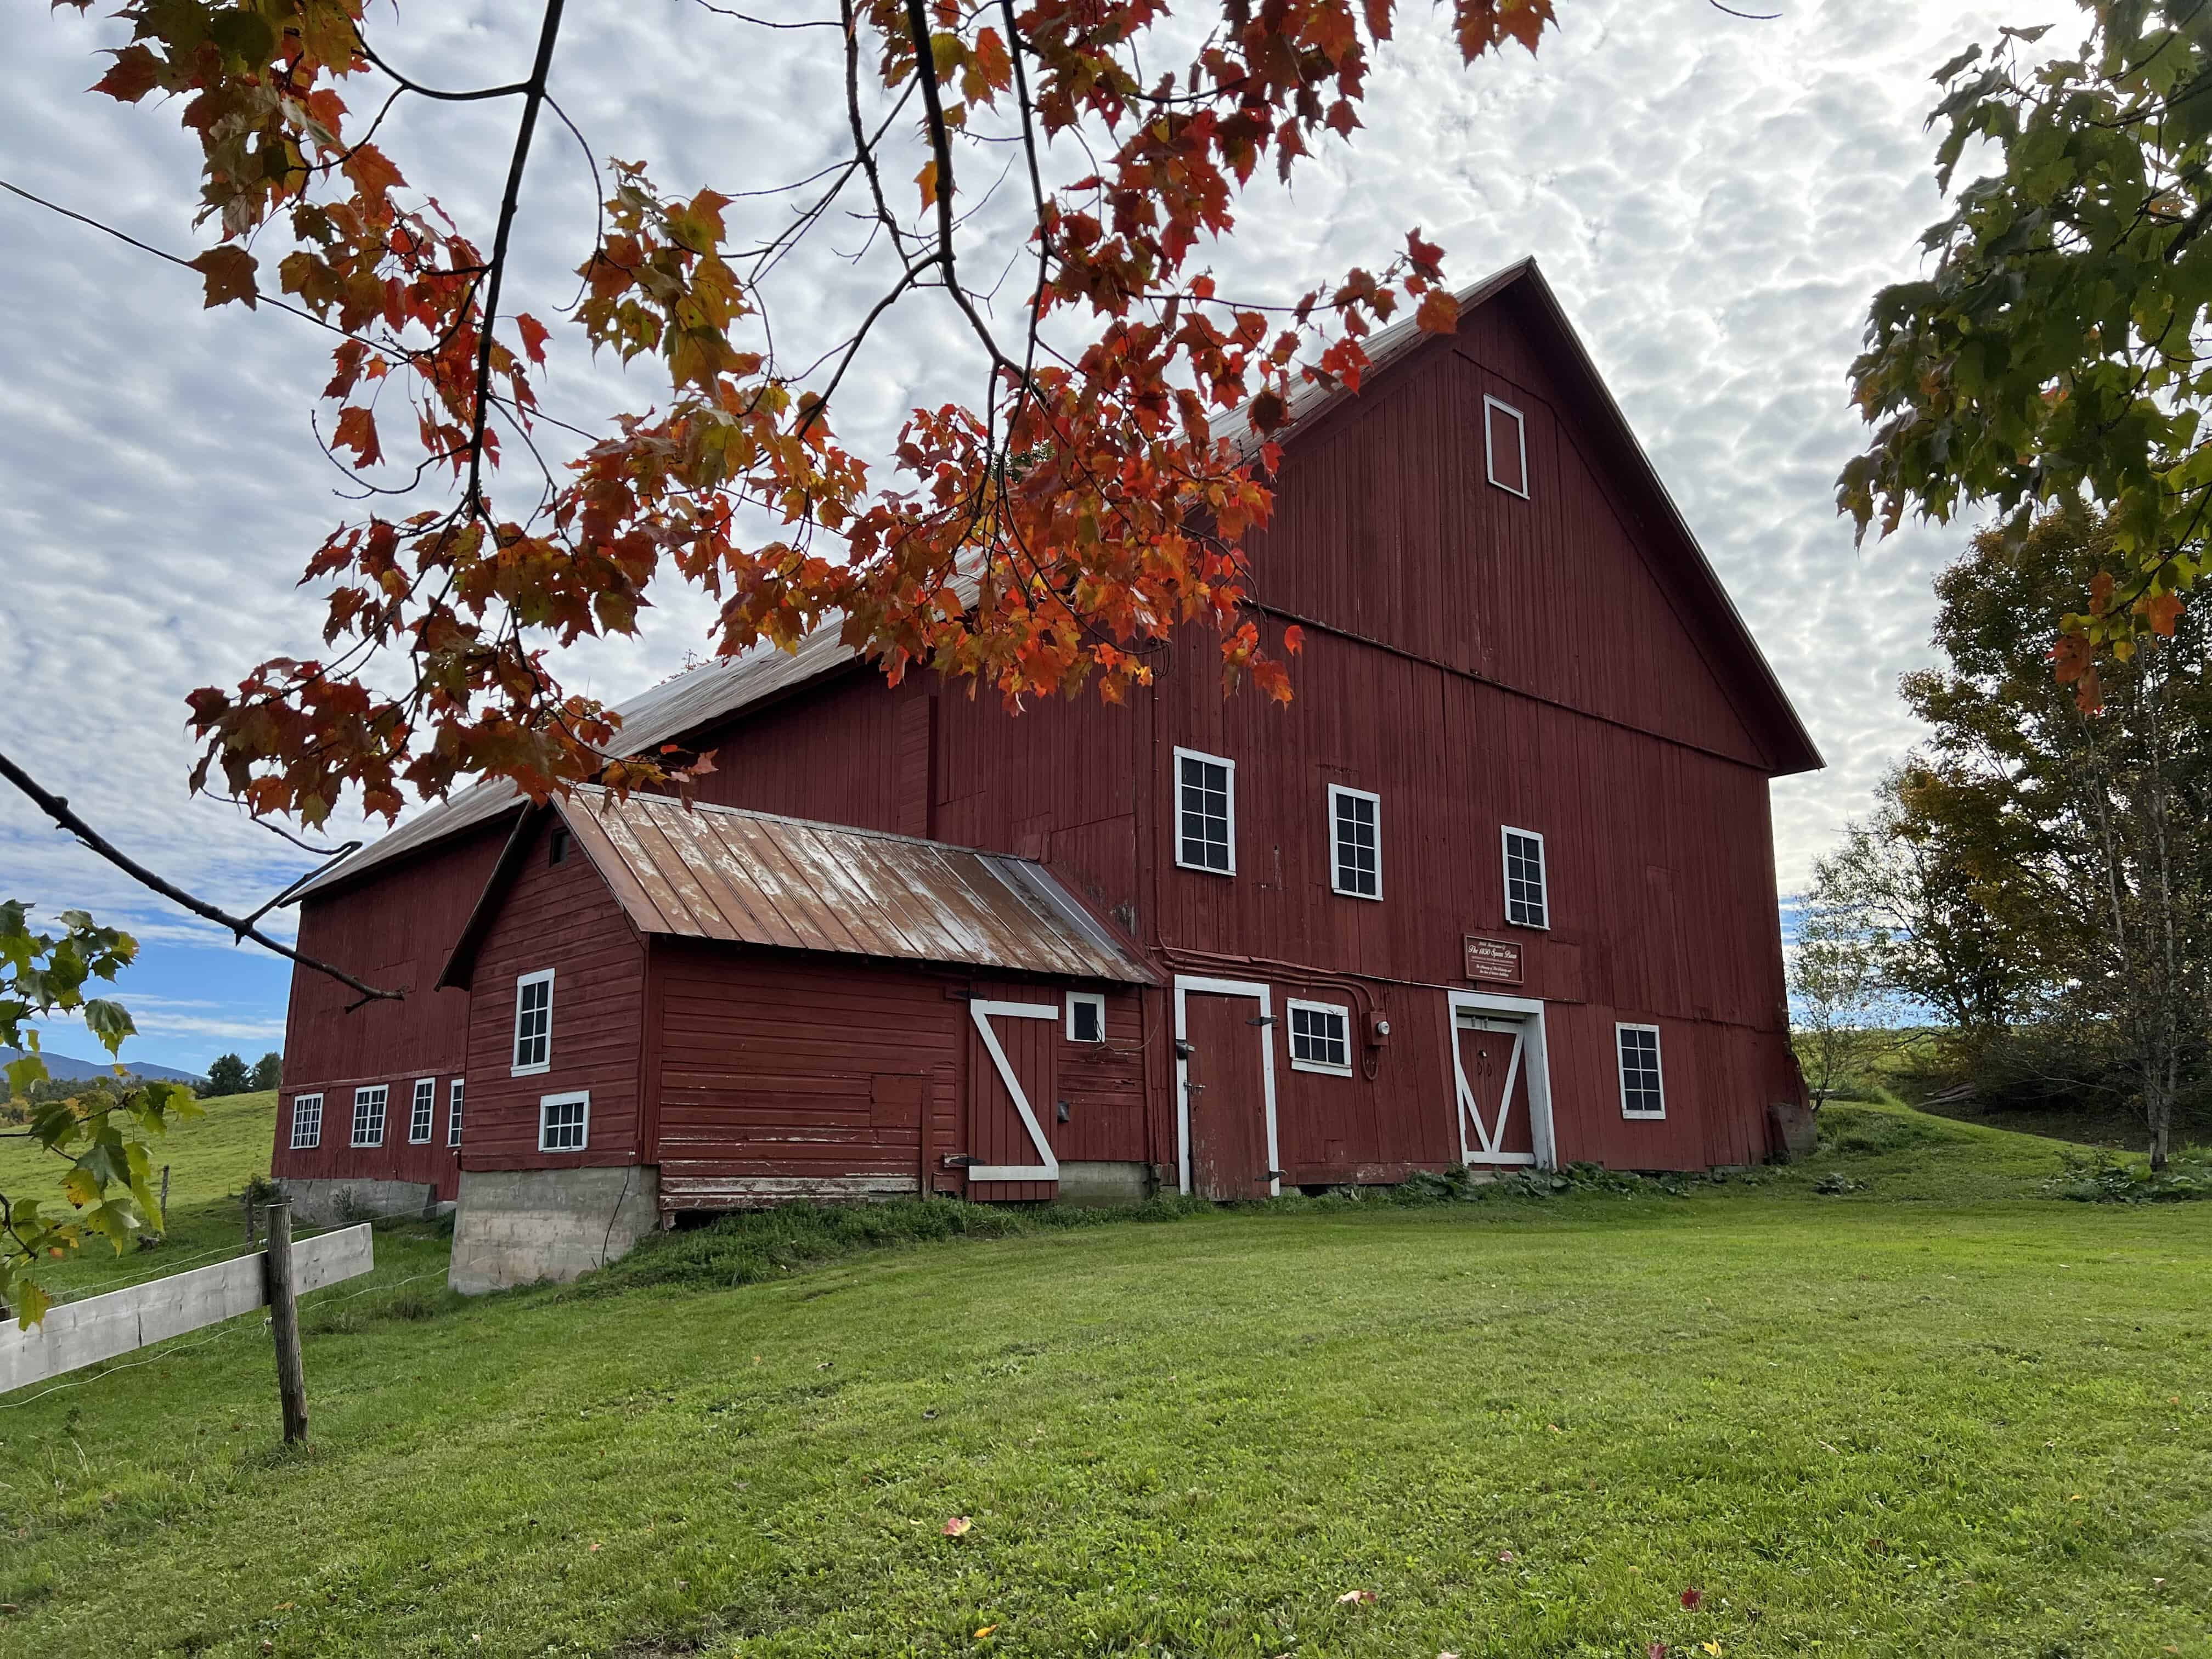 A traditional red barn in New England surrounded by a verdant lawn with autumnal foliage. The changing leaves add a pop of orange and red against the backdrop of a cloudy sky